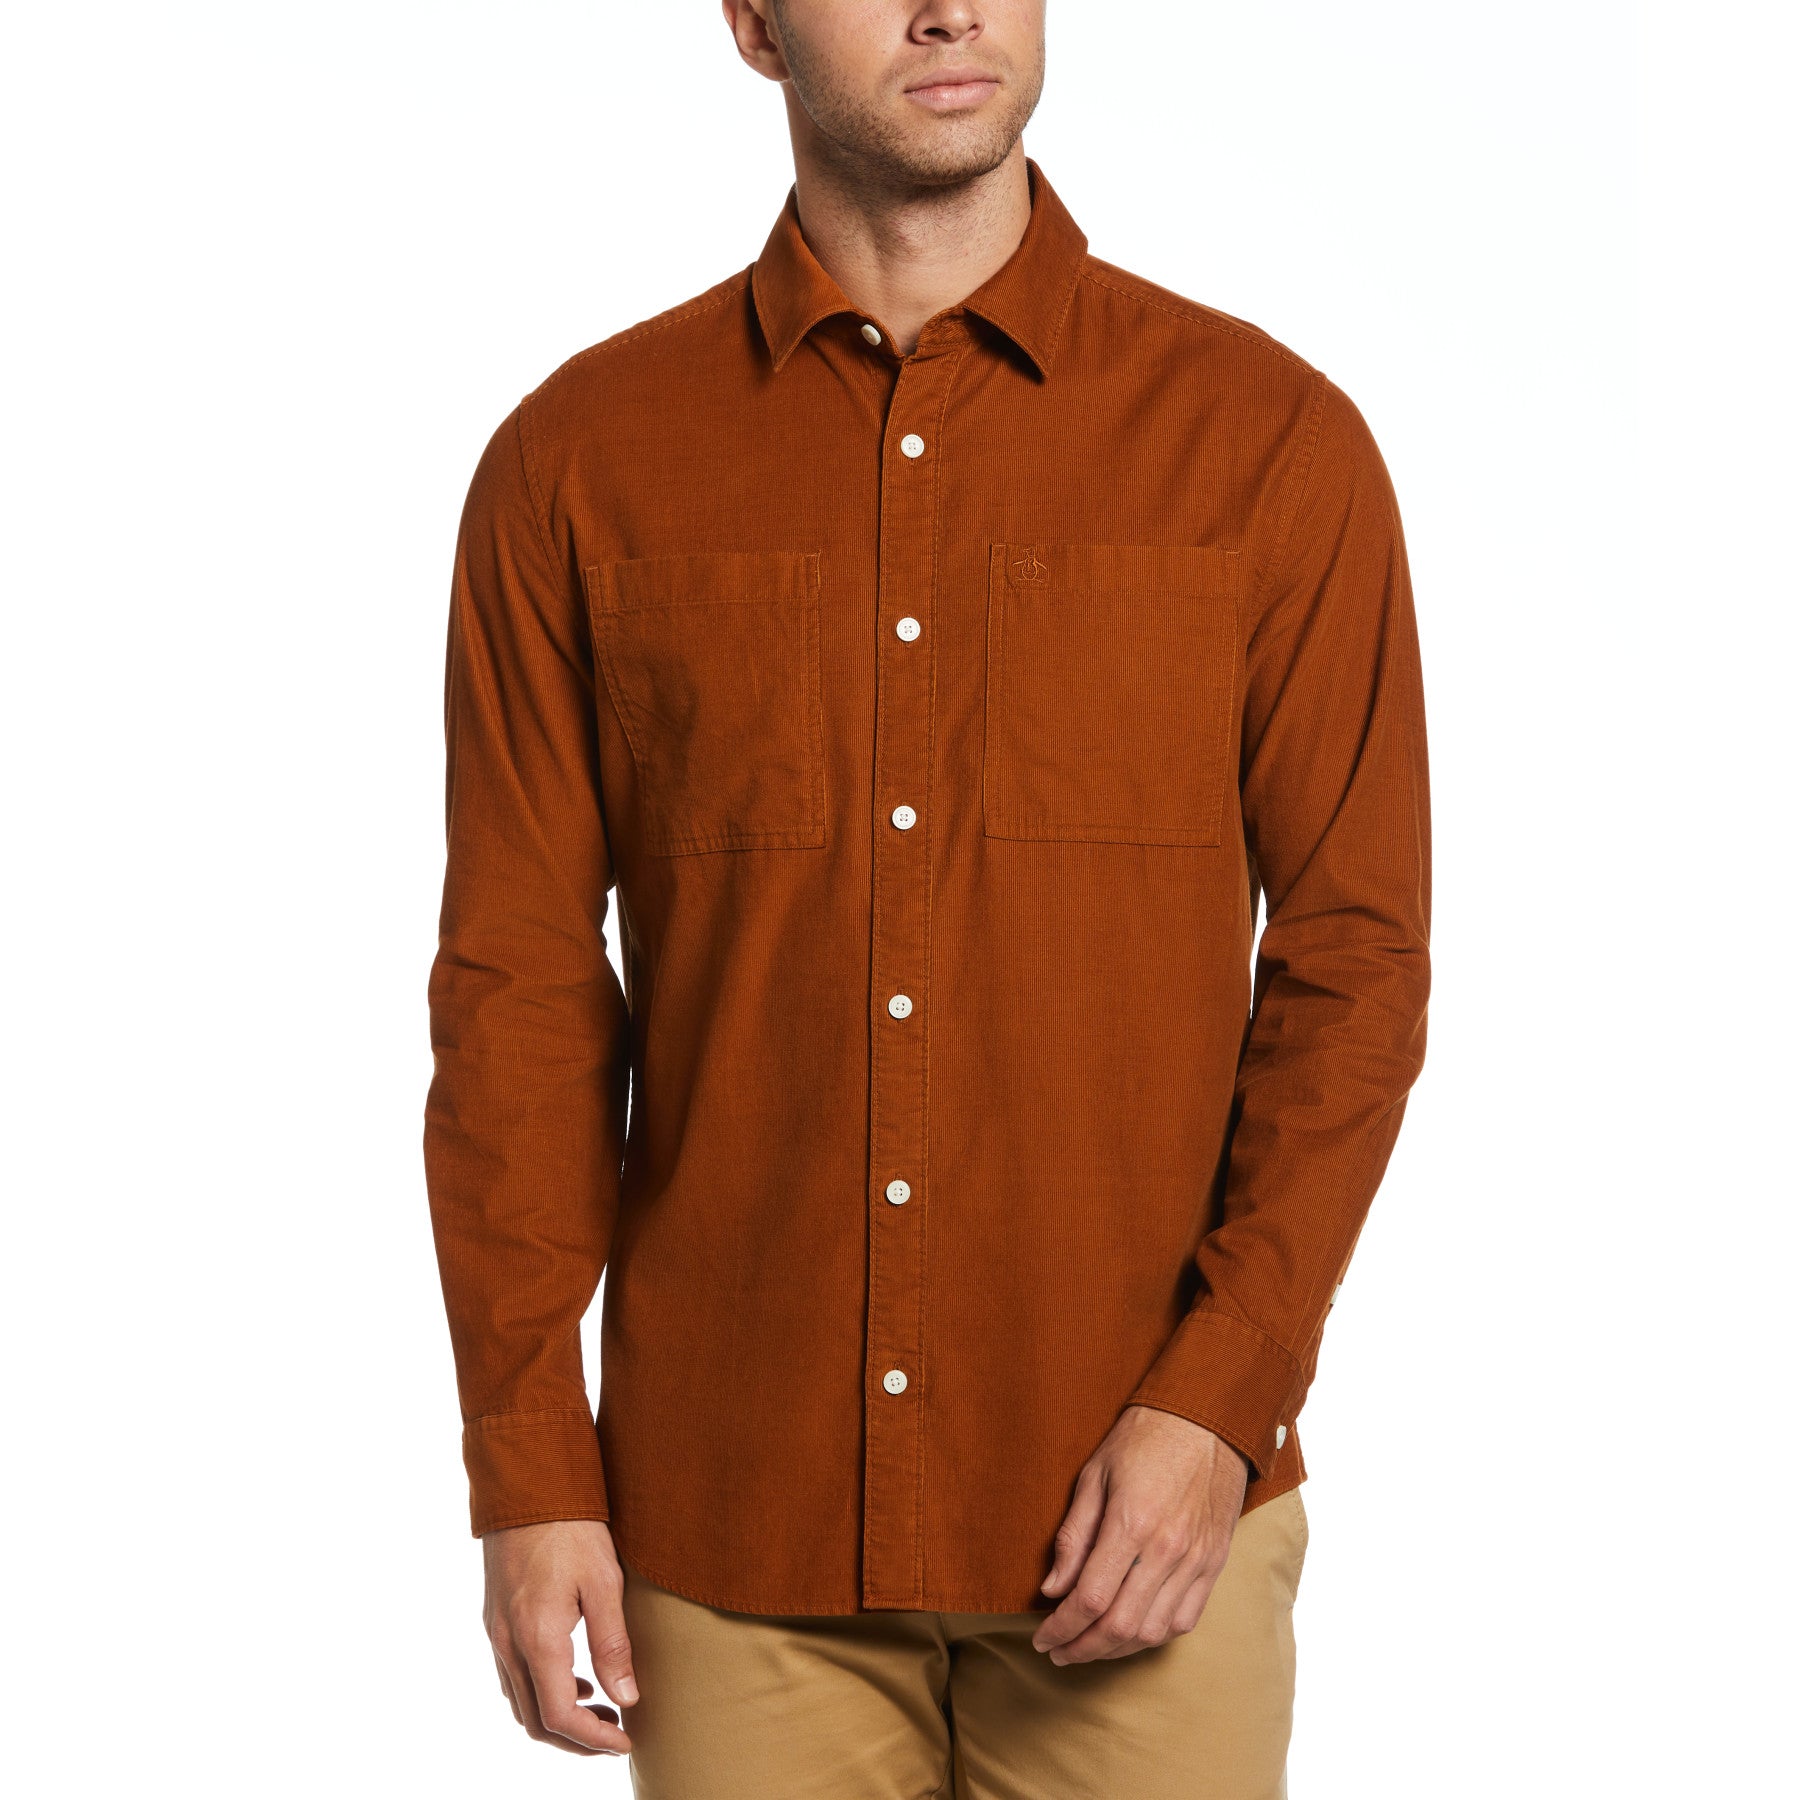 View Double Pocket Corduroy Overshirt In Caramel Cafe information